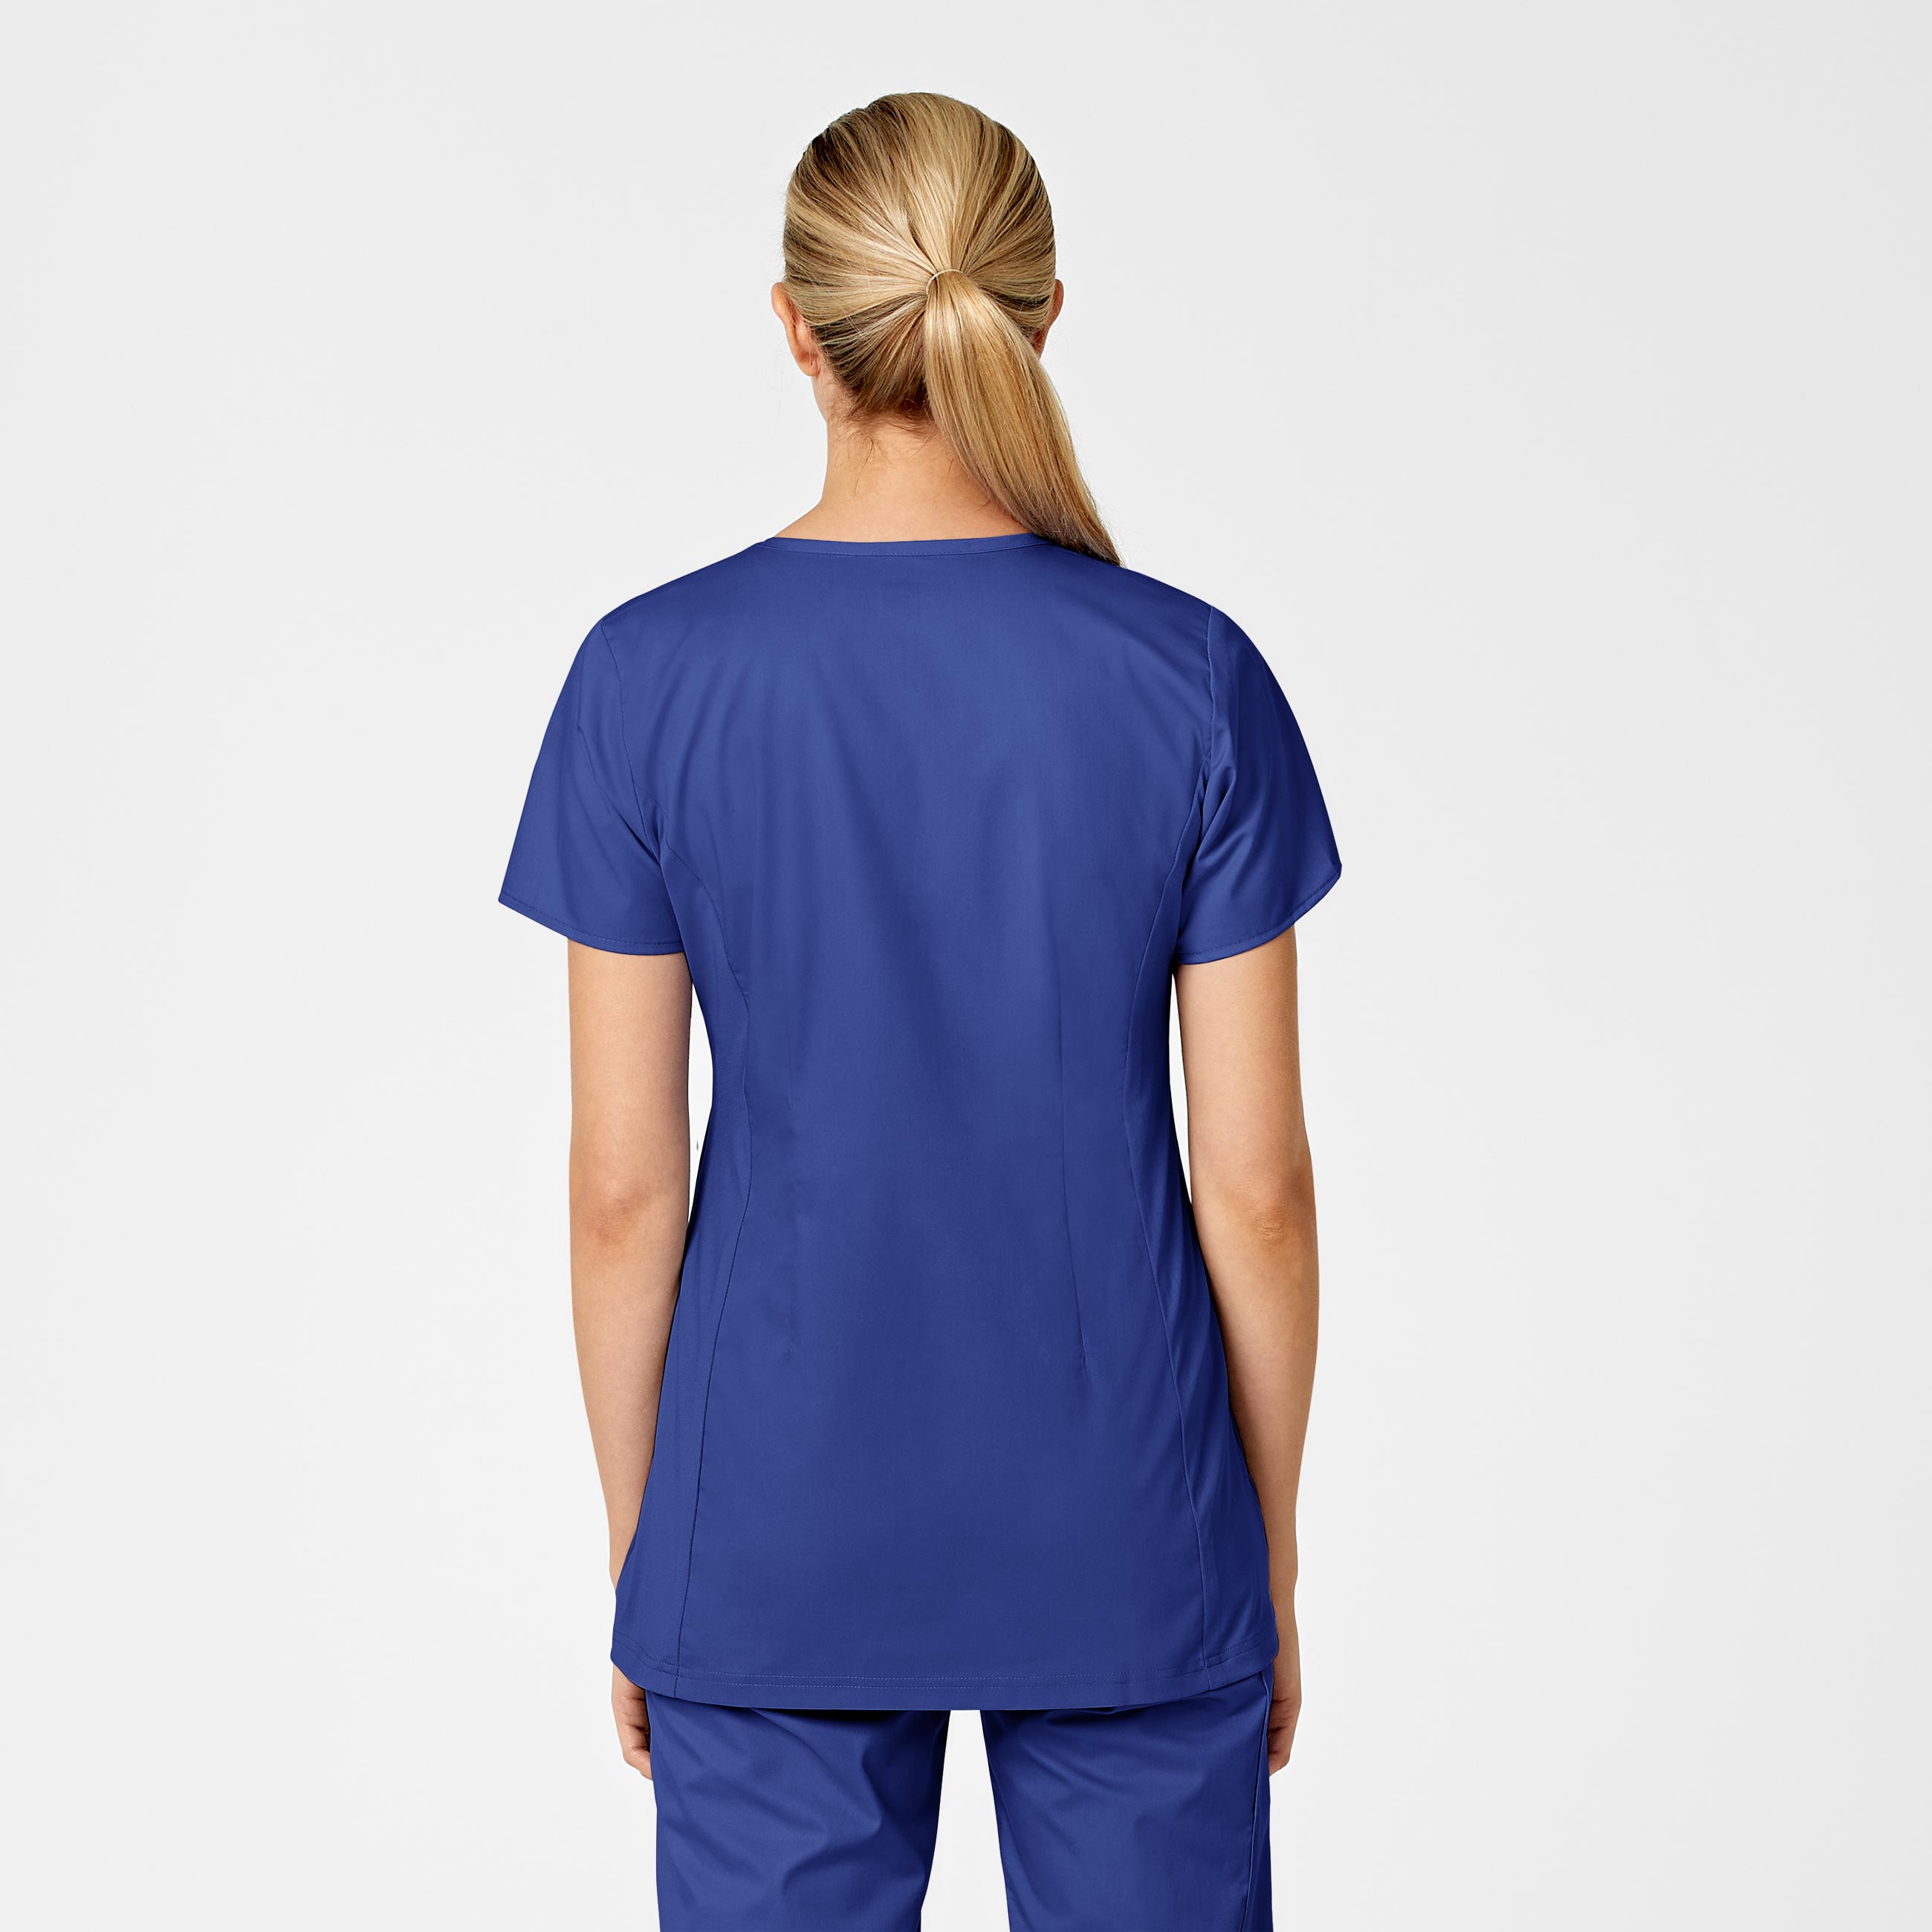 WonderWORK | Scrubs and Uniforms for everyone in Healthcare from